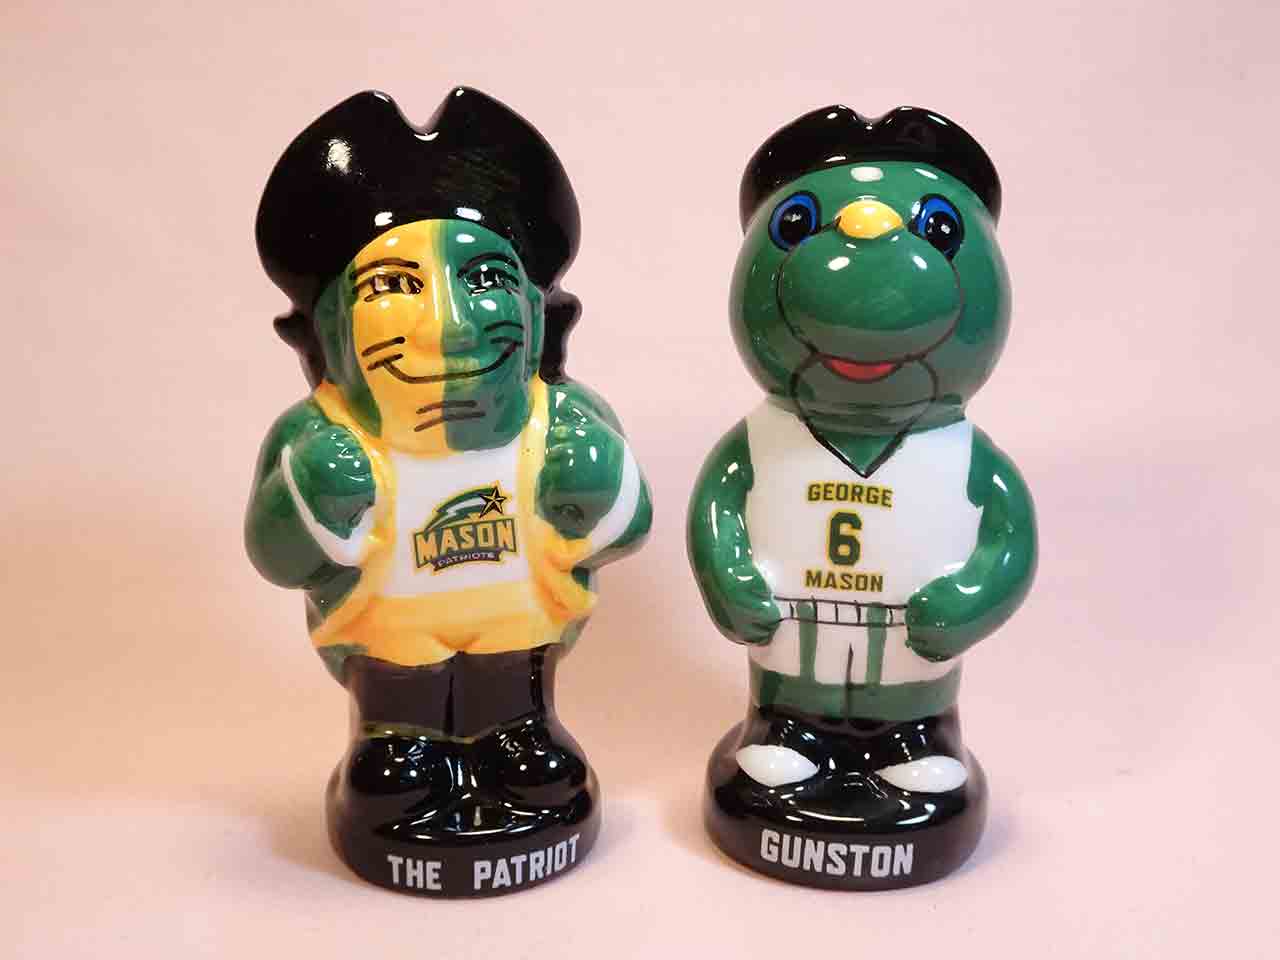 George Mason mascots The Patriot and Gunston salt and pepper shakers